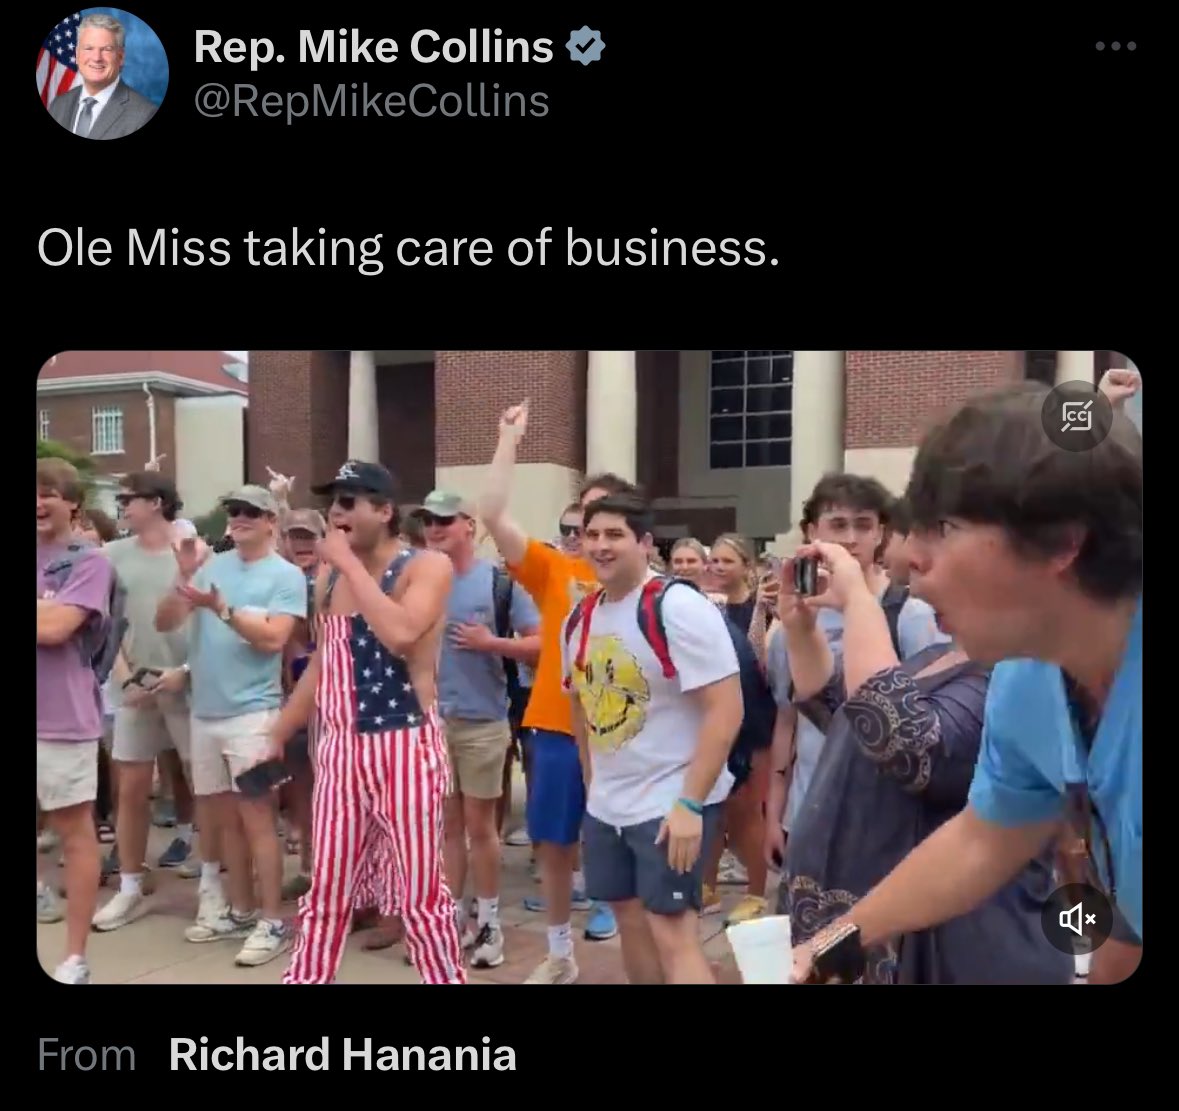 Most people would be shocked & horrified by racist Ole Miss white kids hooting, hollering, making monkey noises, & yelling the N-word at a Black woman. But not Rep. Mike Collins. He calls it “taking care of business.” The GOP is the party of disgusting fucking racists from hell.